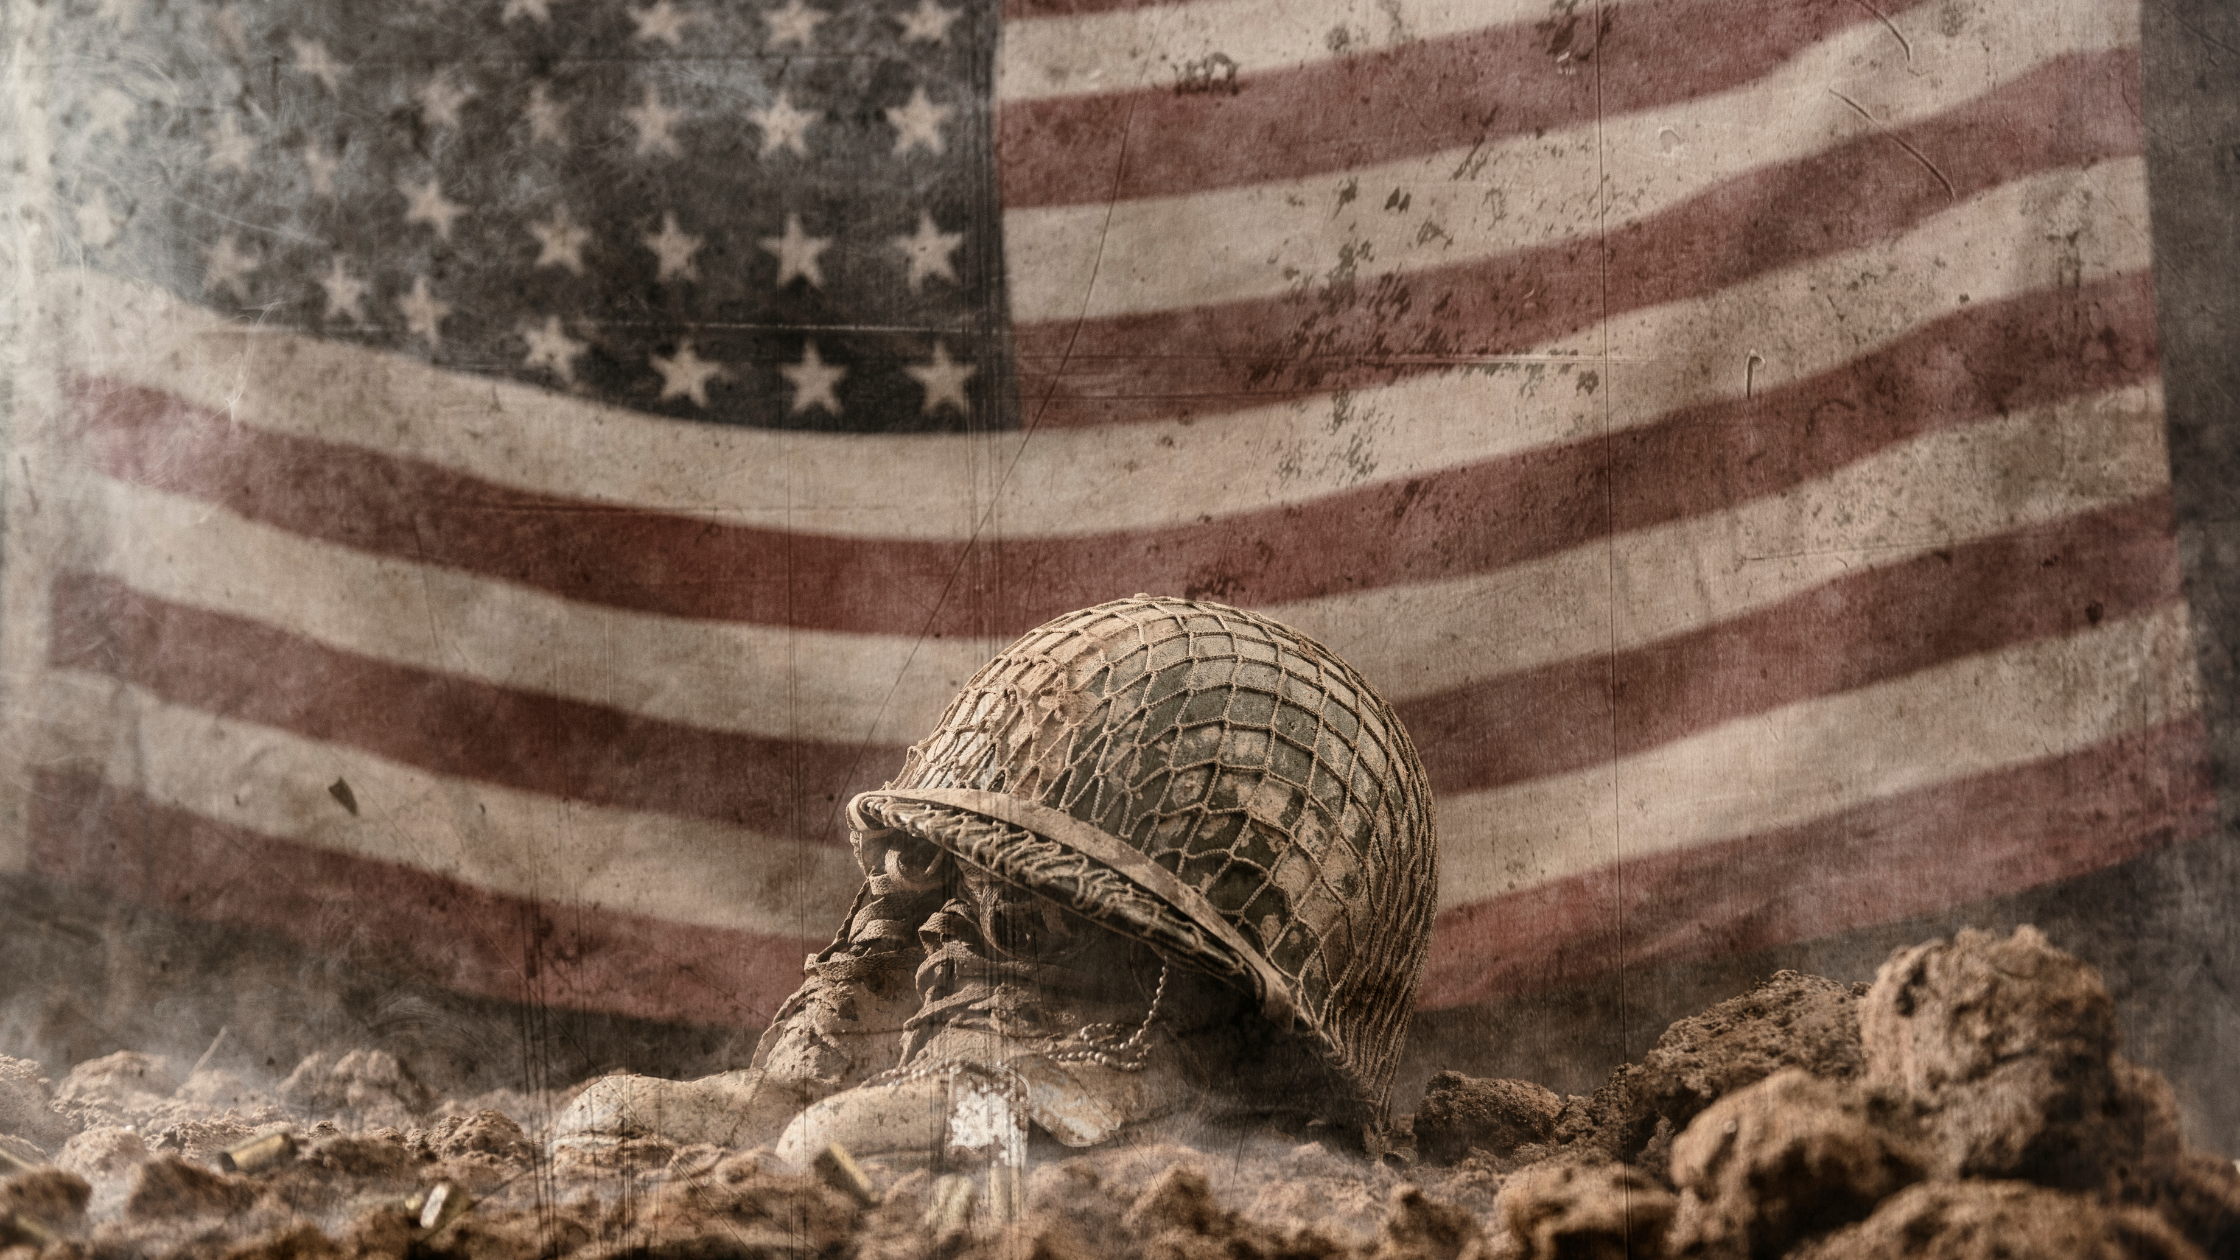 A worn and tattered combat helmet covers a pair of beaten in combat boots, set among rubble. The background is a faded and dusty american flag.